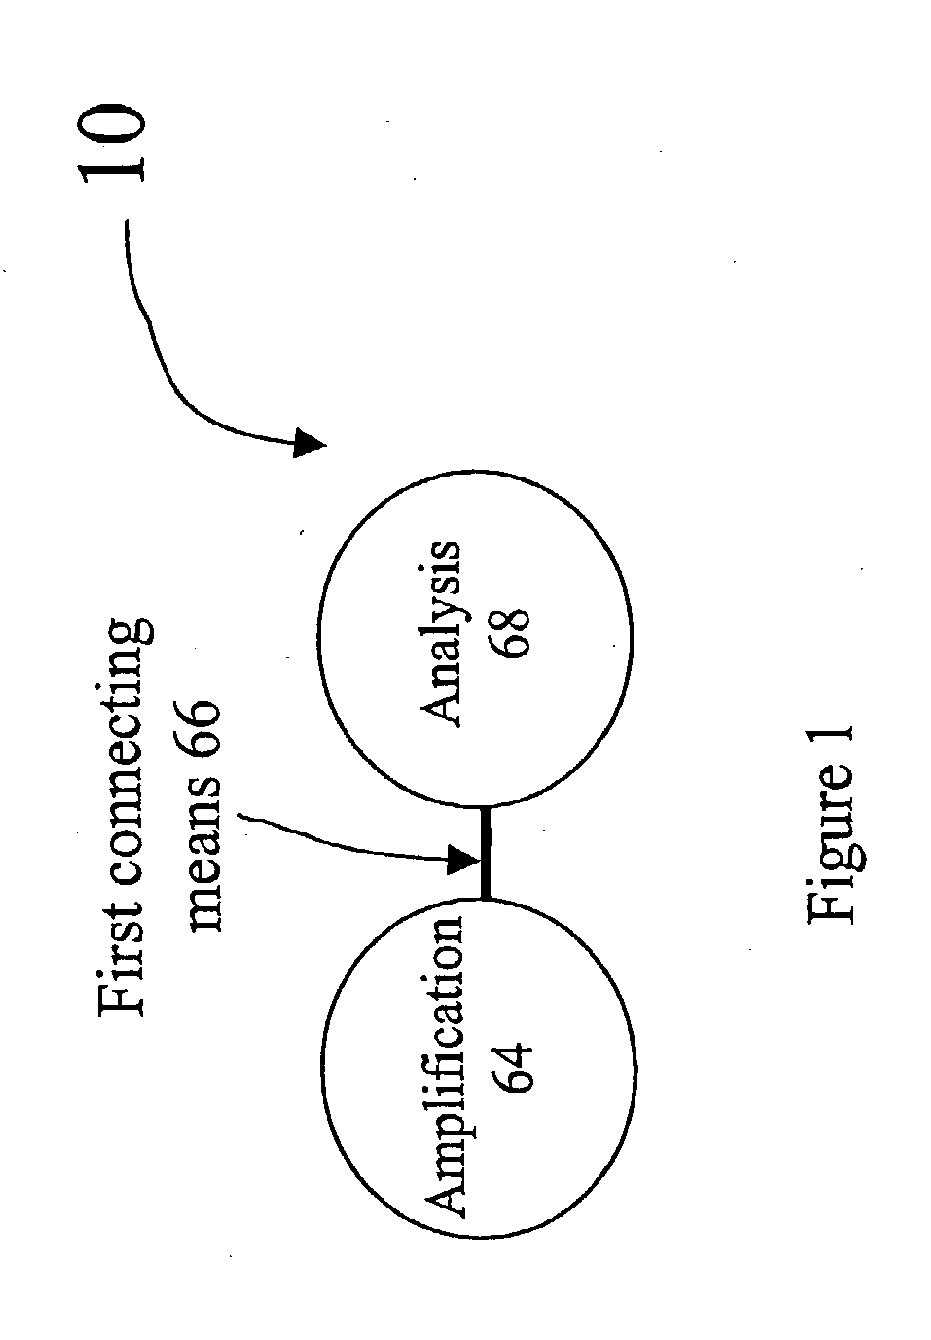 Apparatus for polynucleotide detection and quantitation